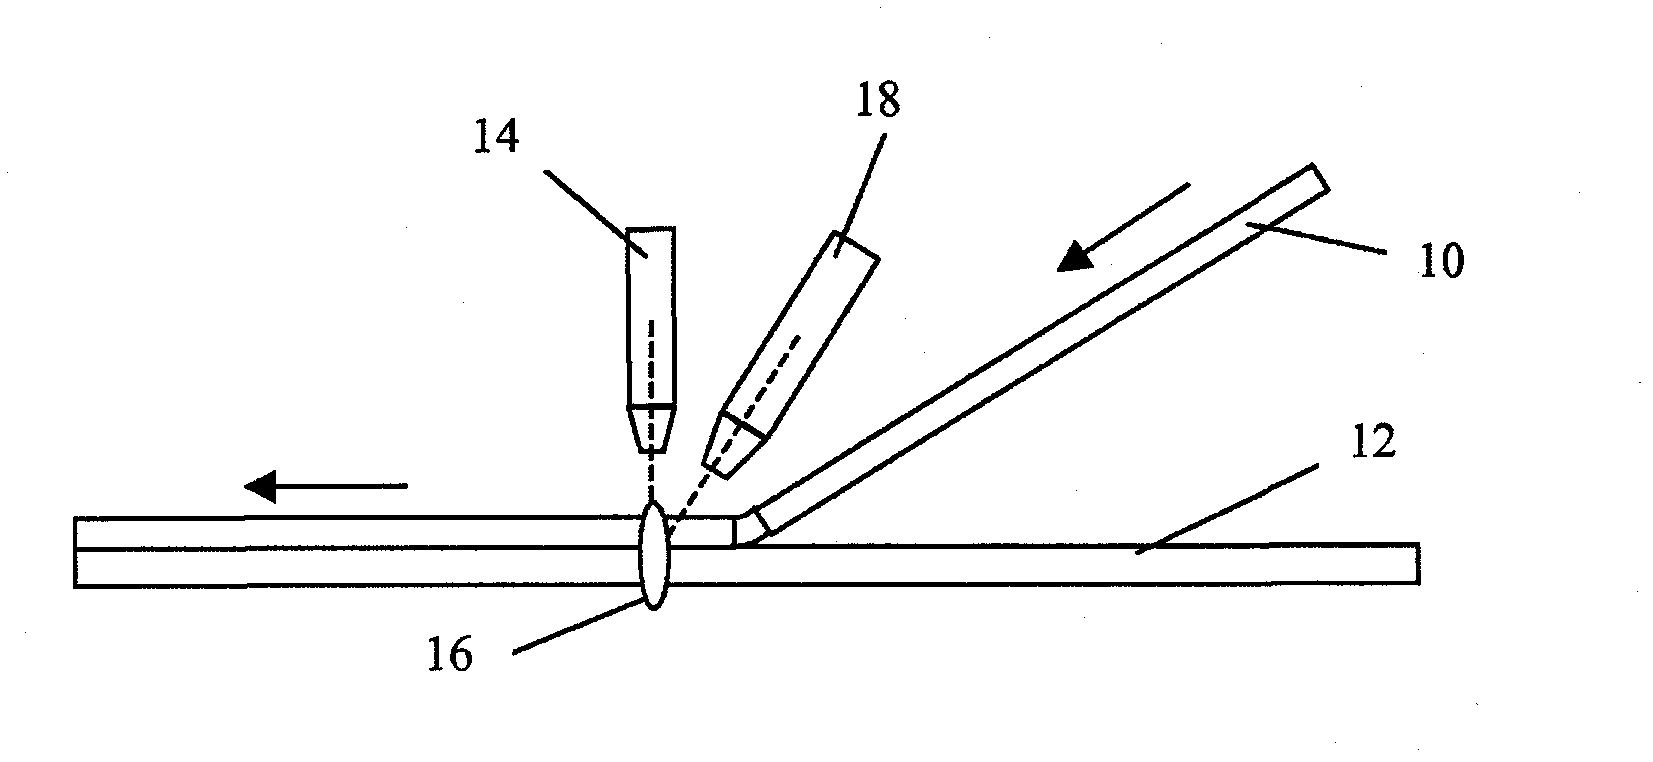 Method and apparatus for fabricating a fibre reinforced thermoplastic composite structure